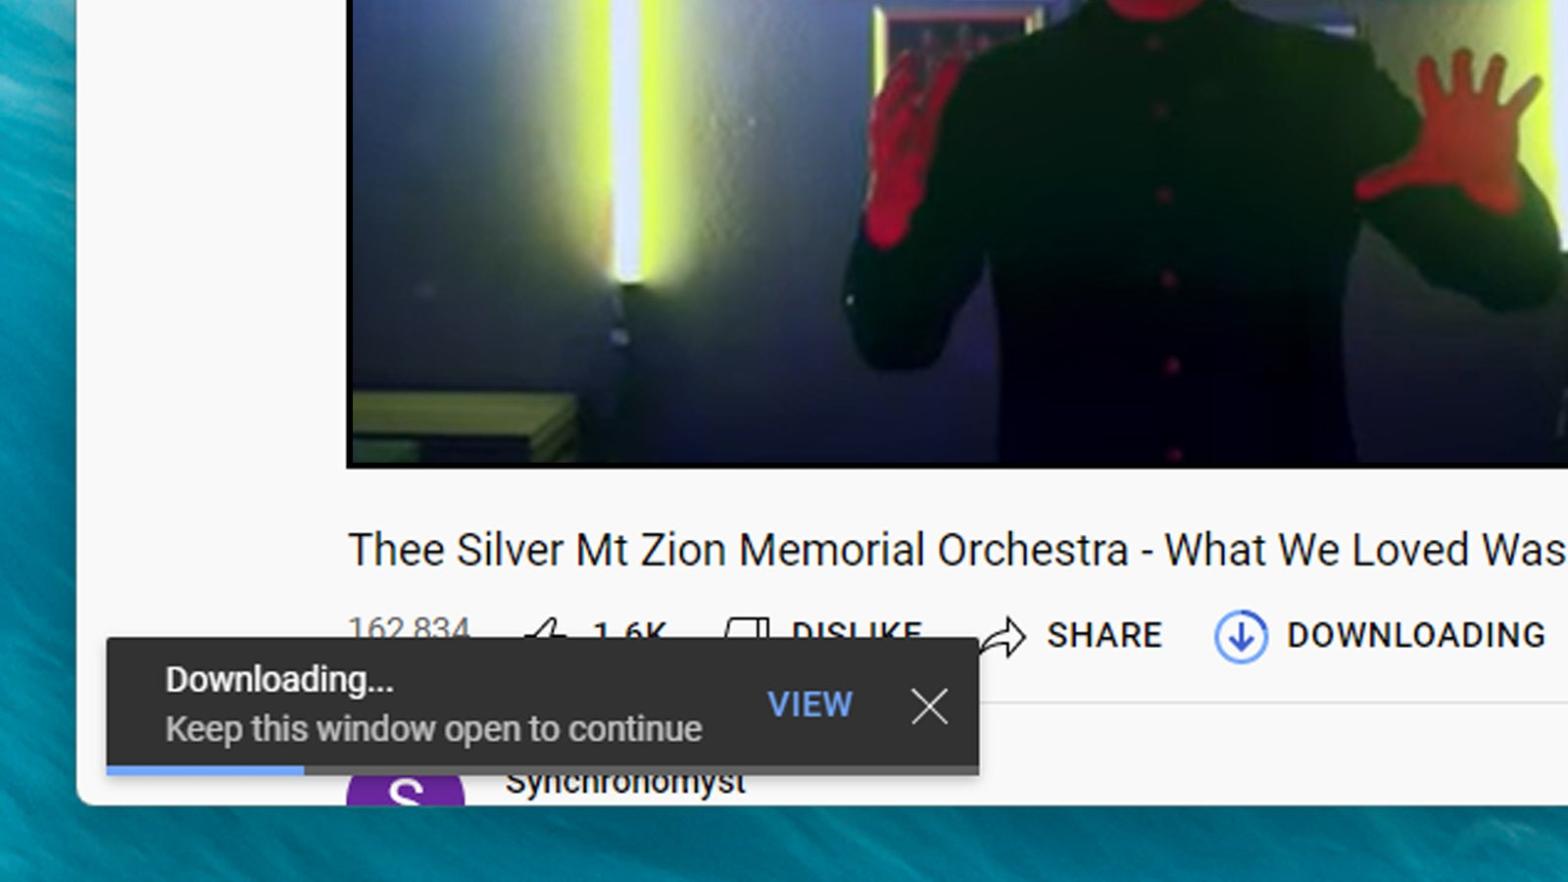 You can now download YouTube videos in the browser. (Screenshot: YouTube)